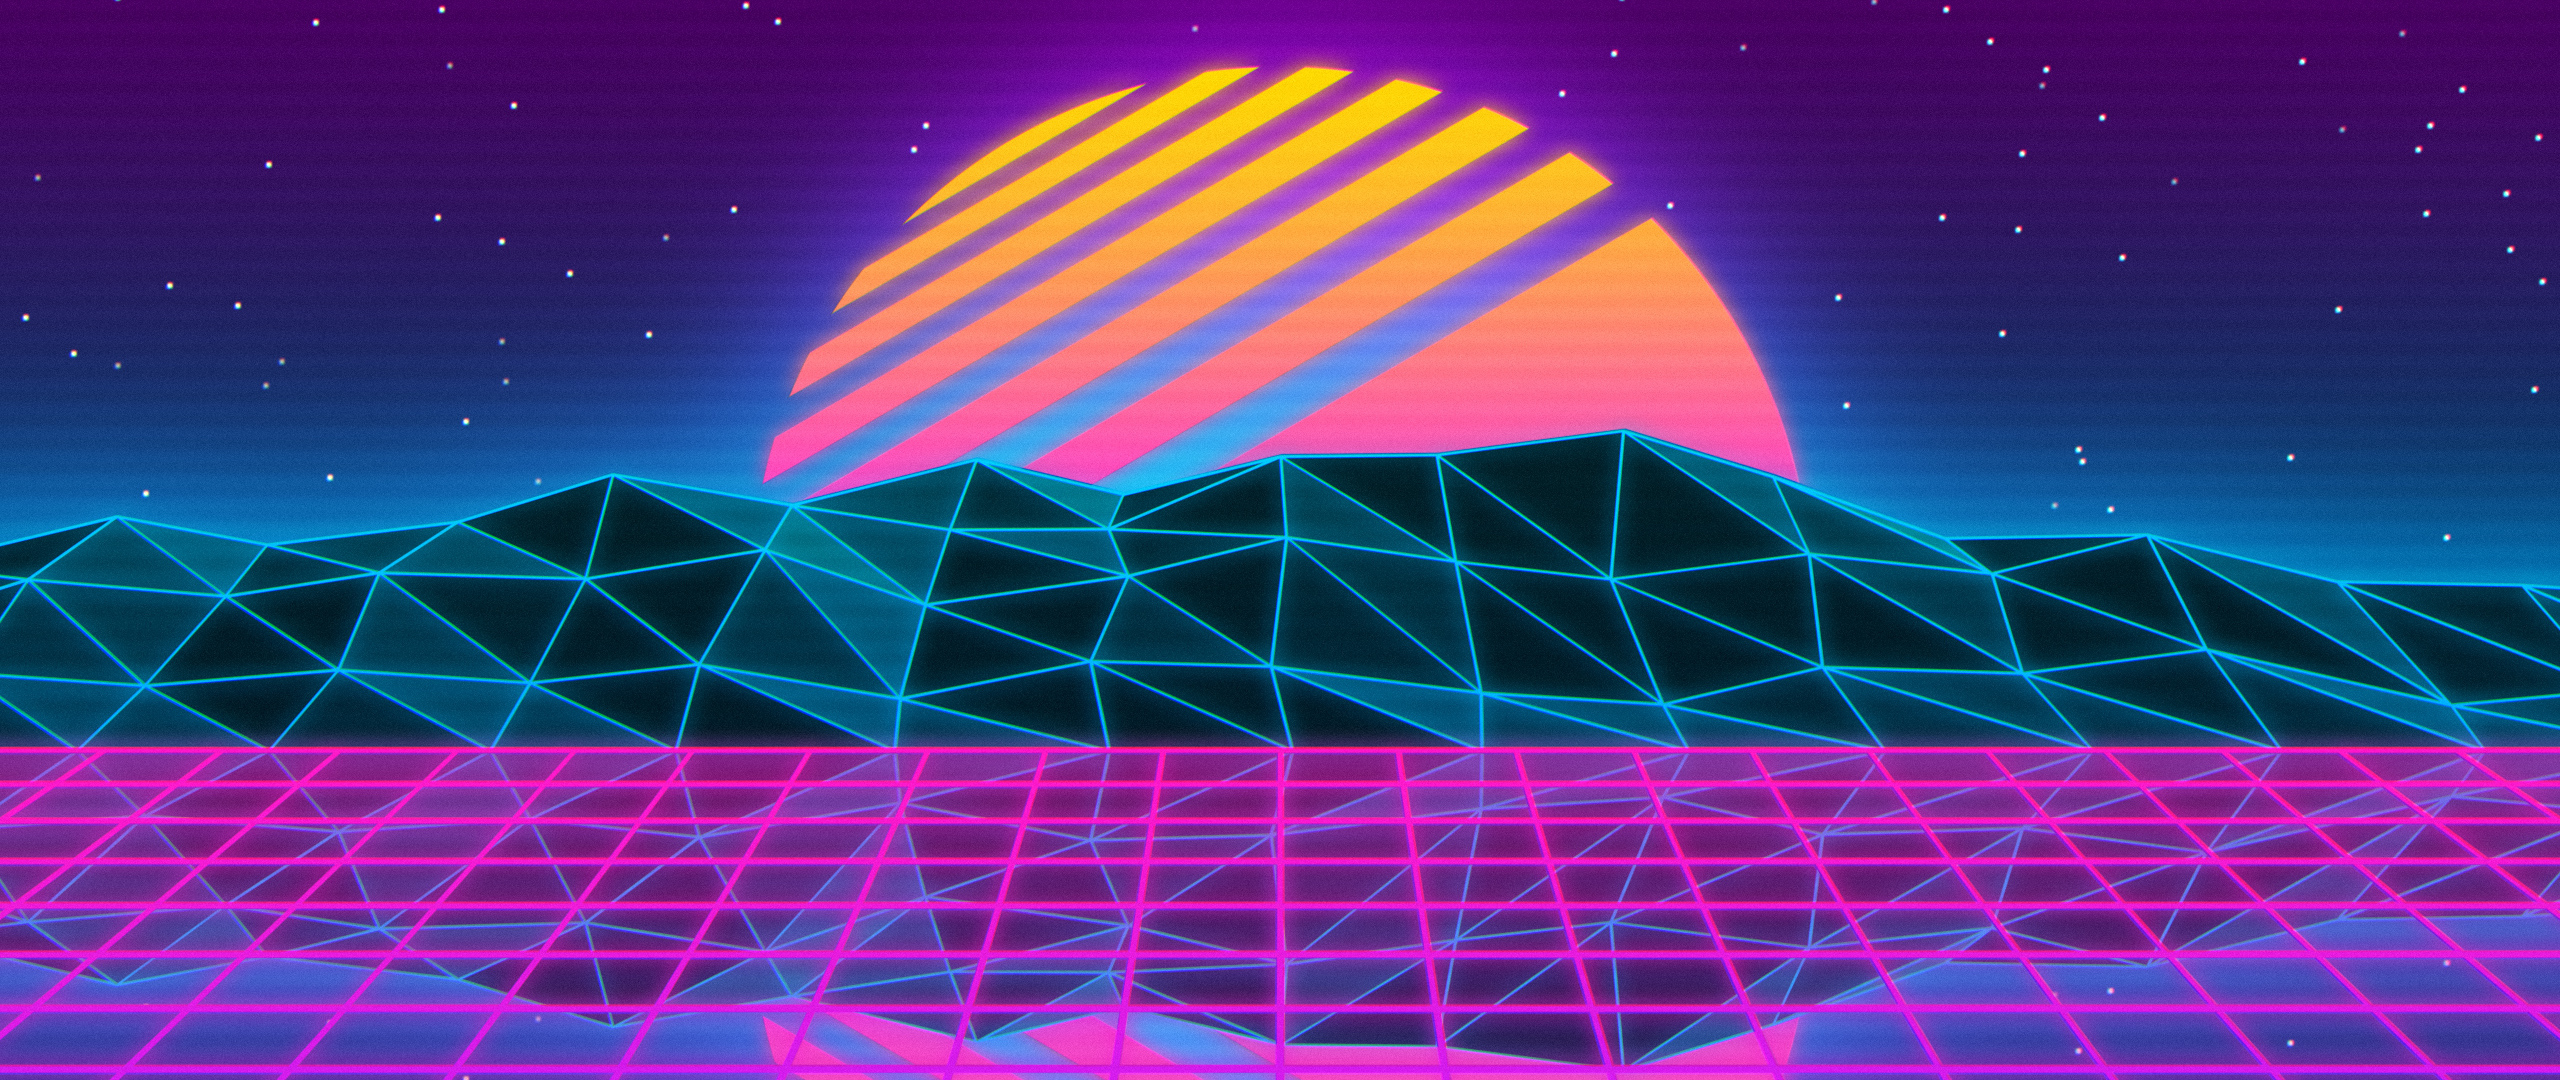 Vaporwave Computer Wallpapers  Synthwave Wallpapers iPhone